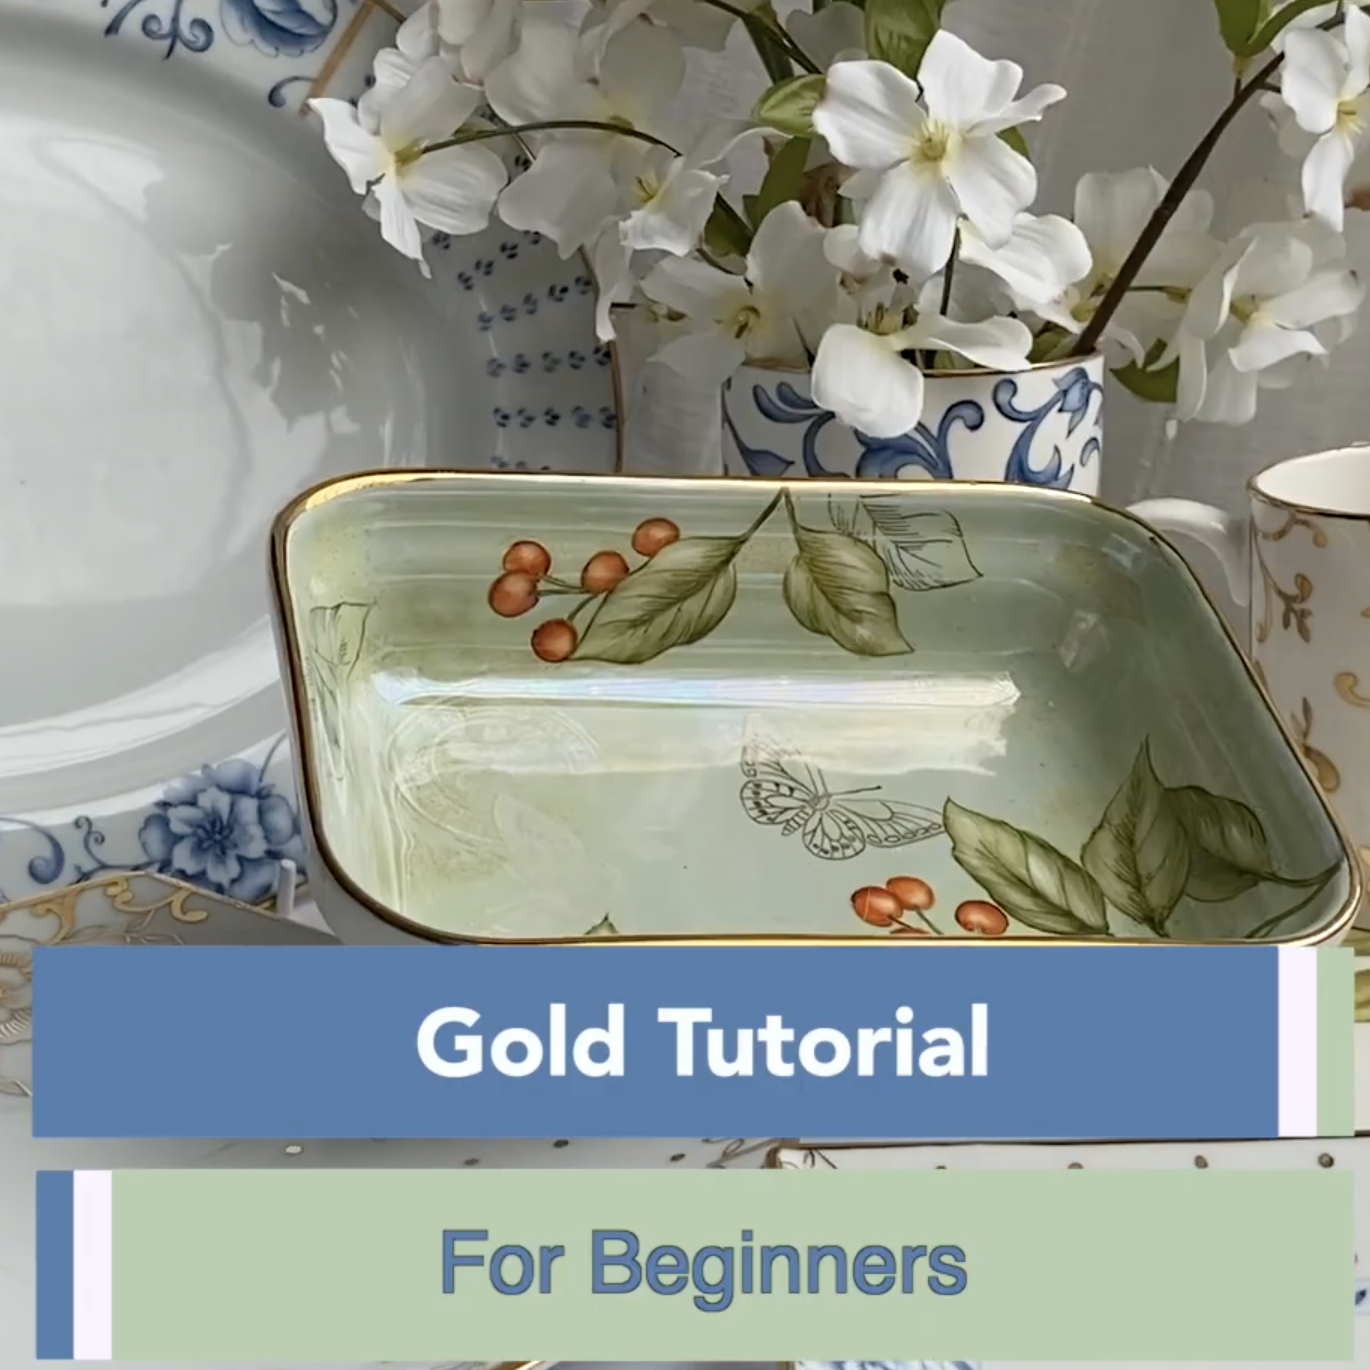 [English] Gold Tutorial for Beginners